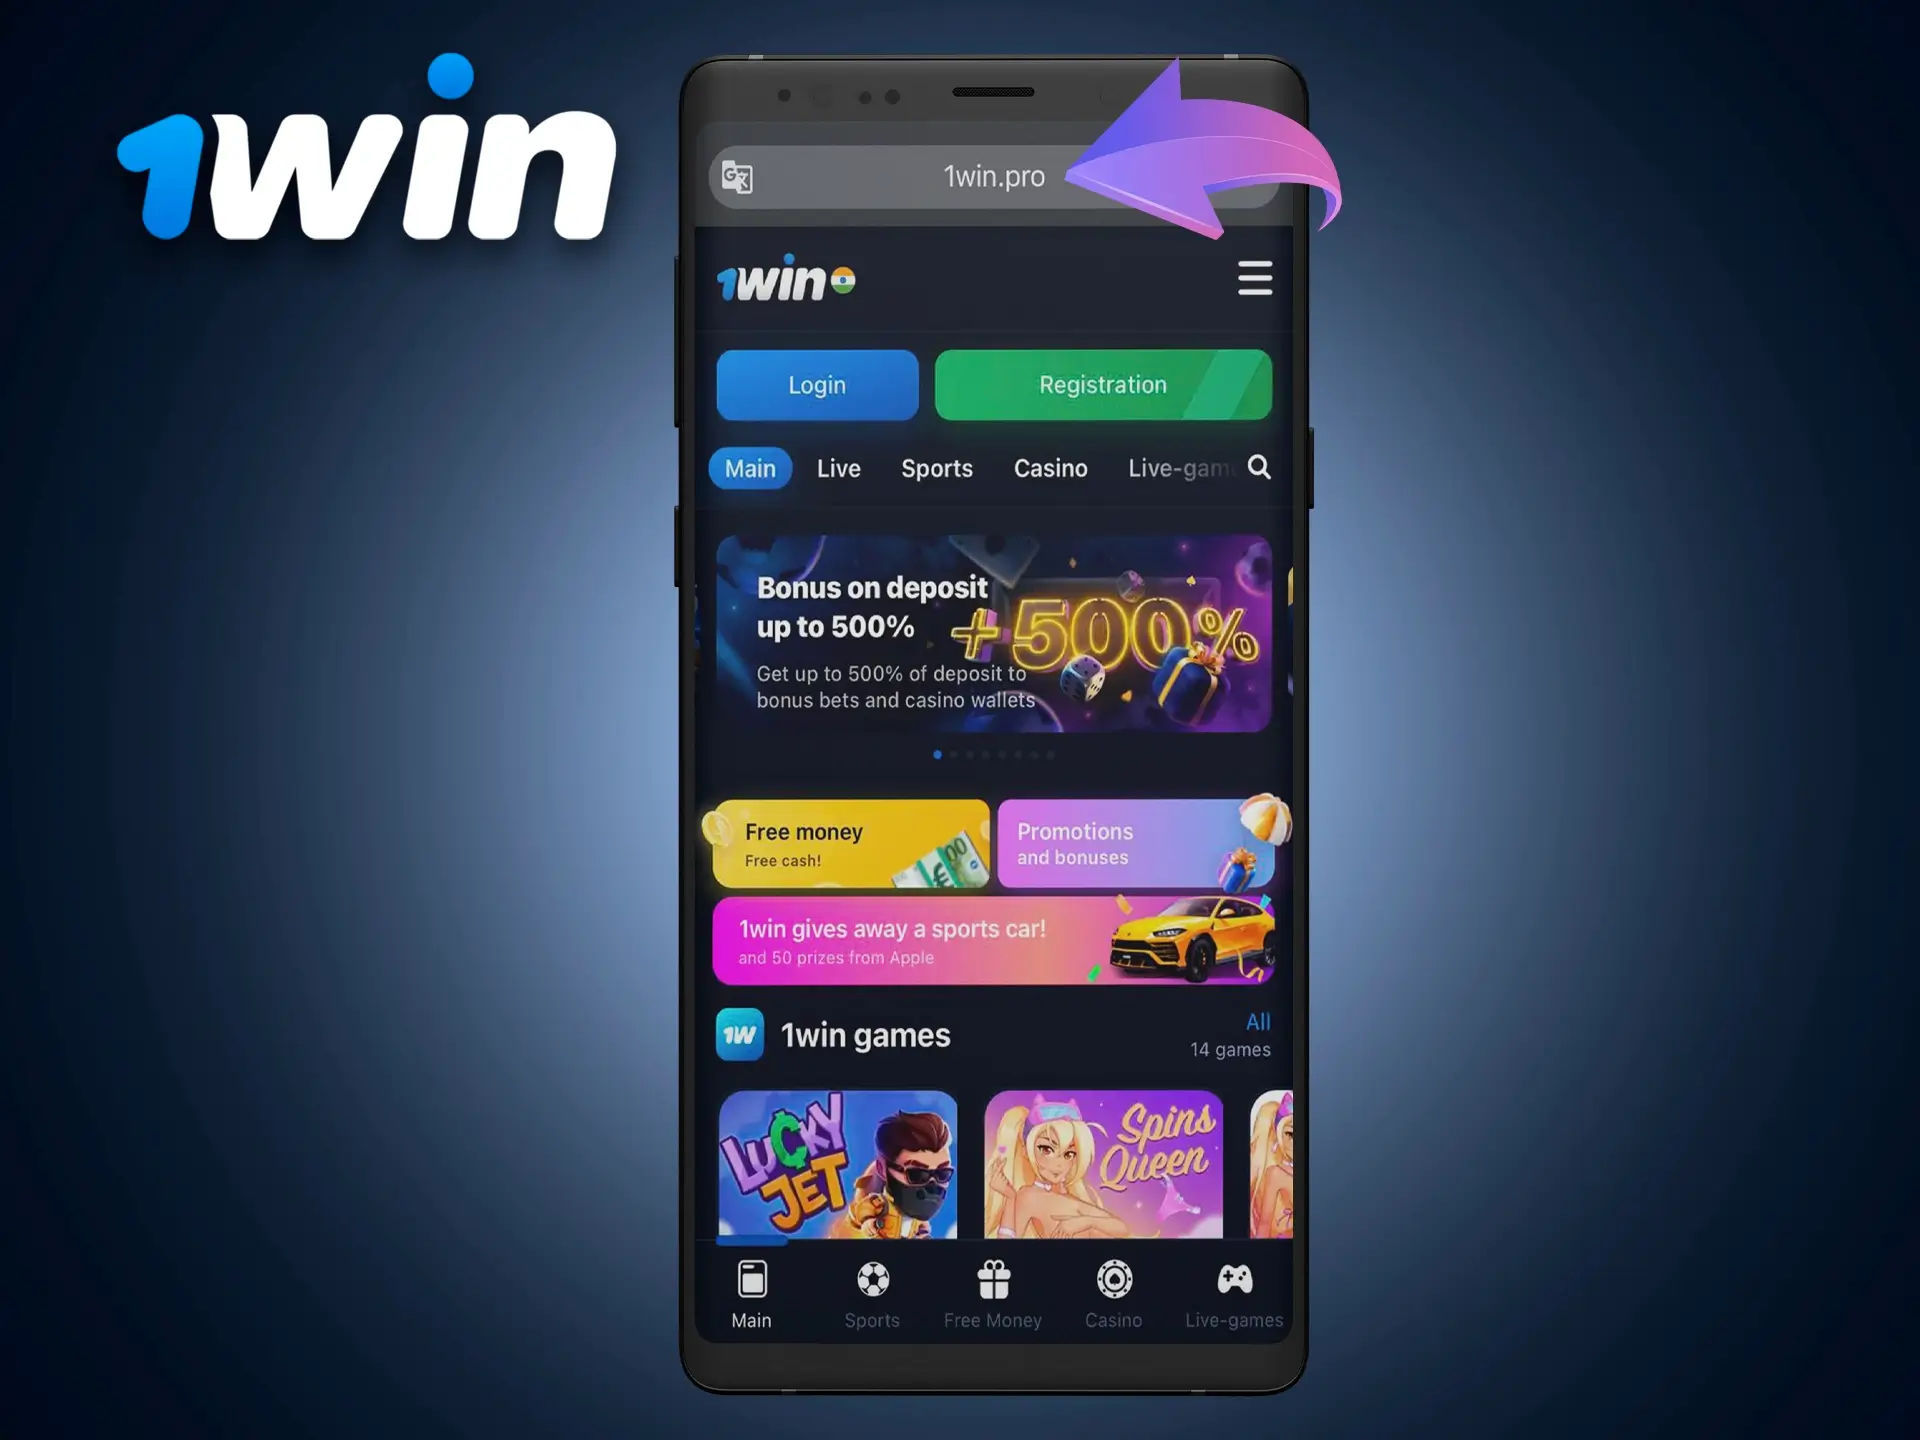 Enter the 1Win website into the address bar of your Android device.